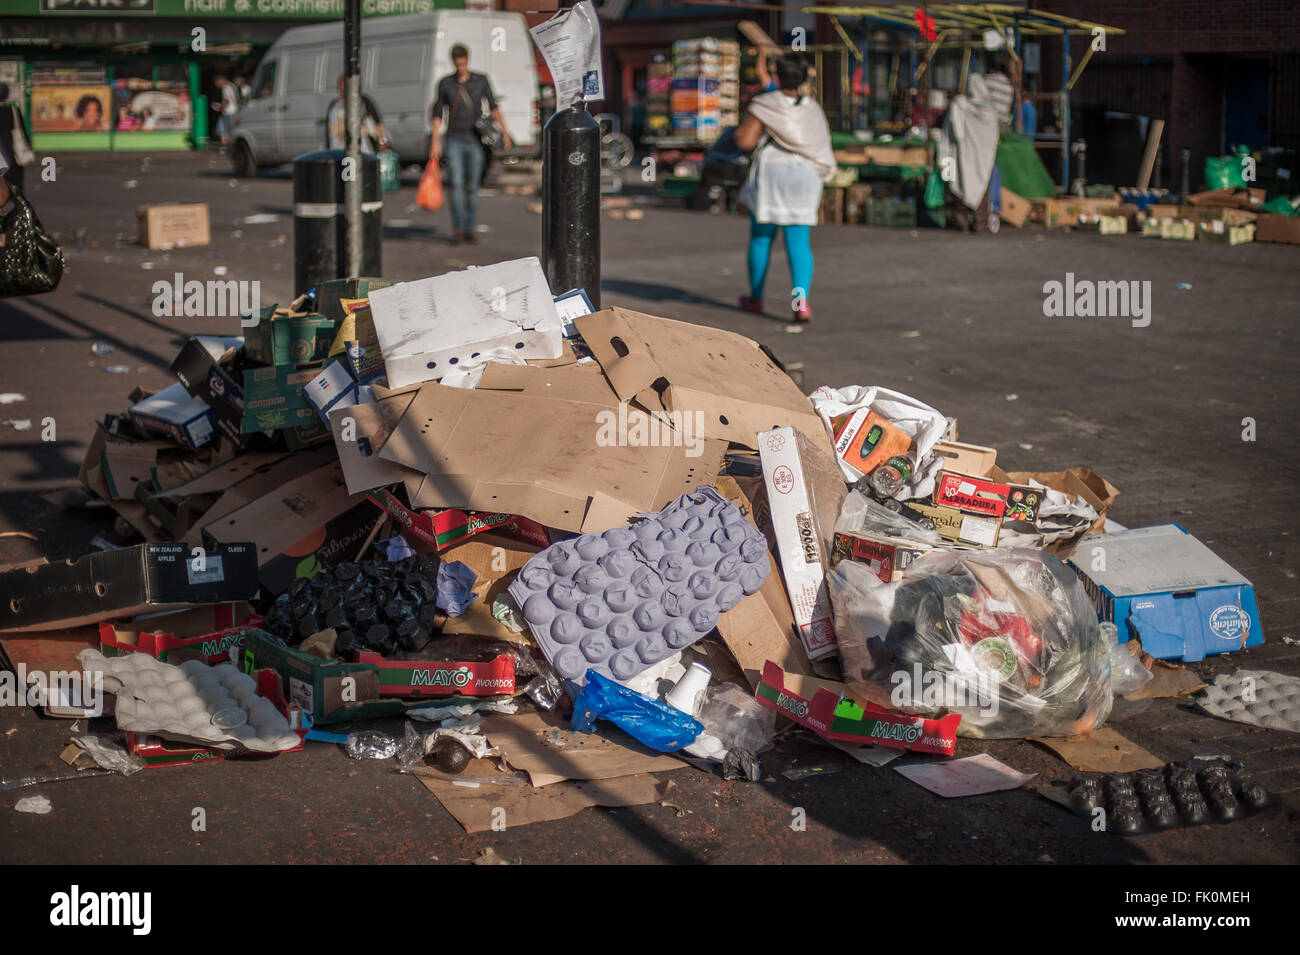 Rubbish aftermath of Ridley Road Market, Dalston, East London Stock Photo